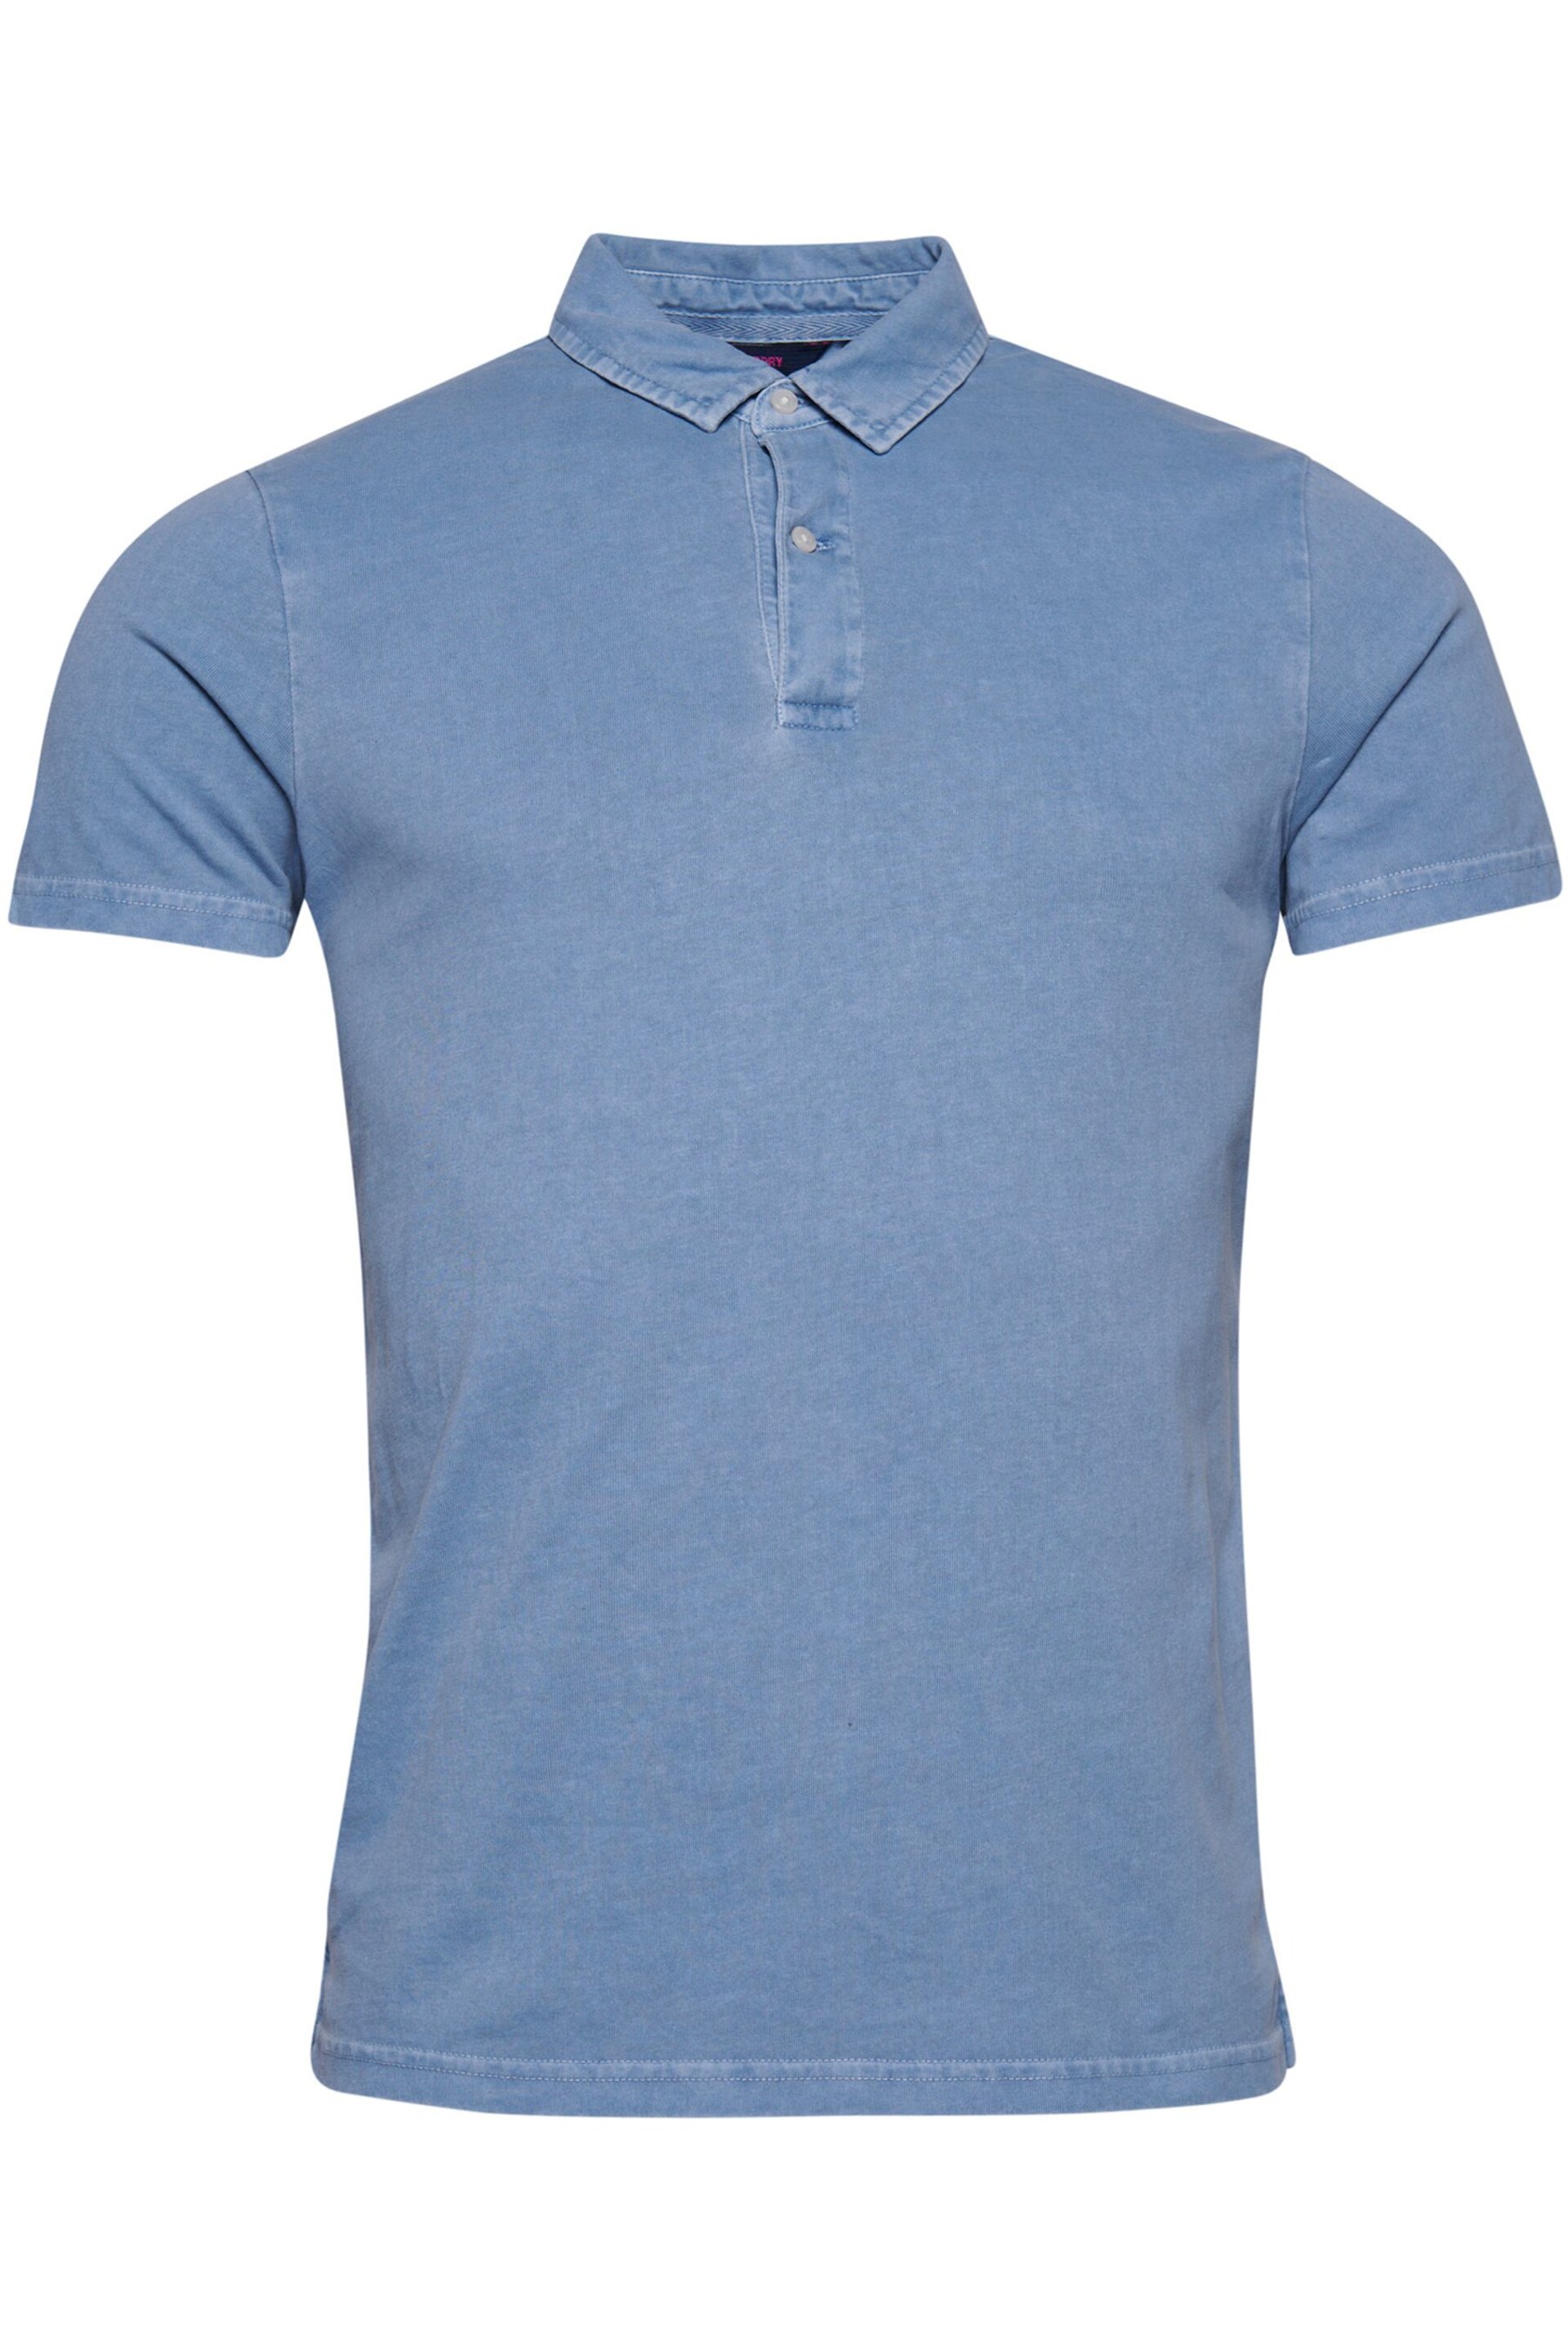 Superdry Blue Studios Jersey Polo Shirt - Image 6 of 6